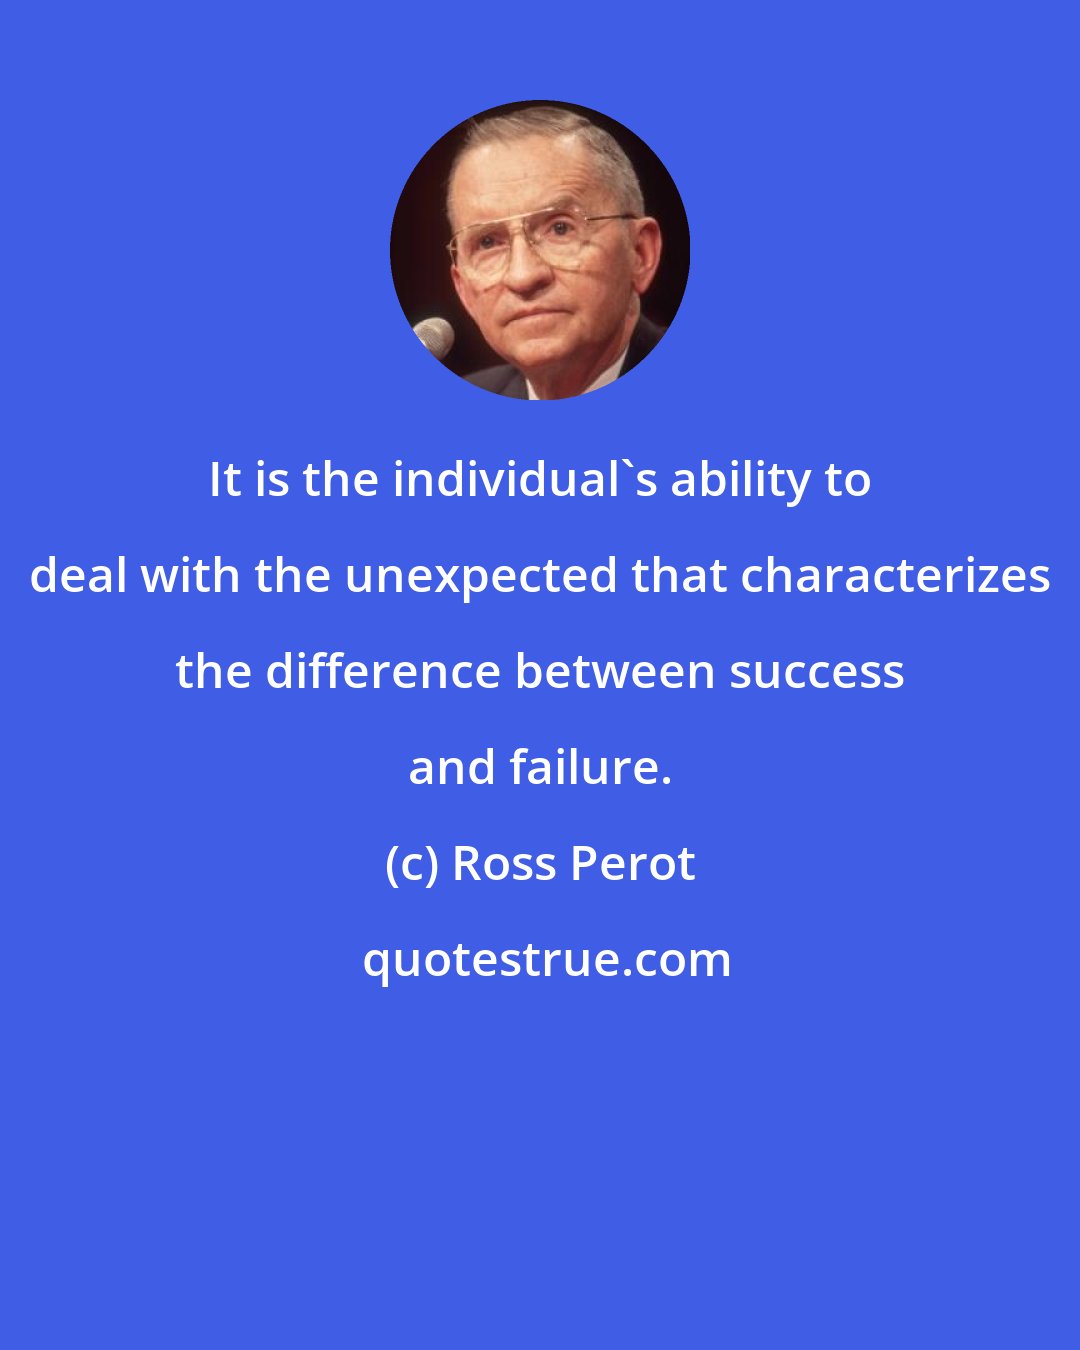 Ross Perot: It is the individual's ability to deal with the unexpected that characterizes the difference between success and failure.